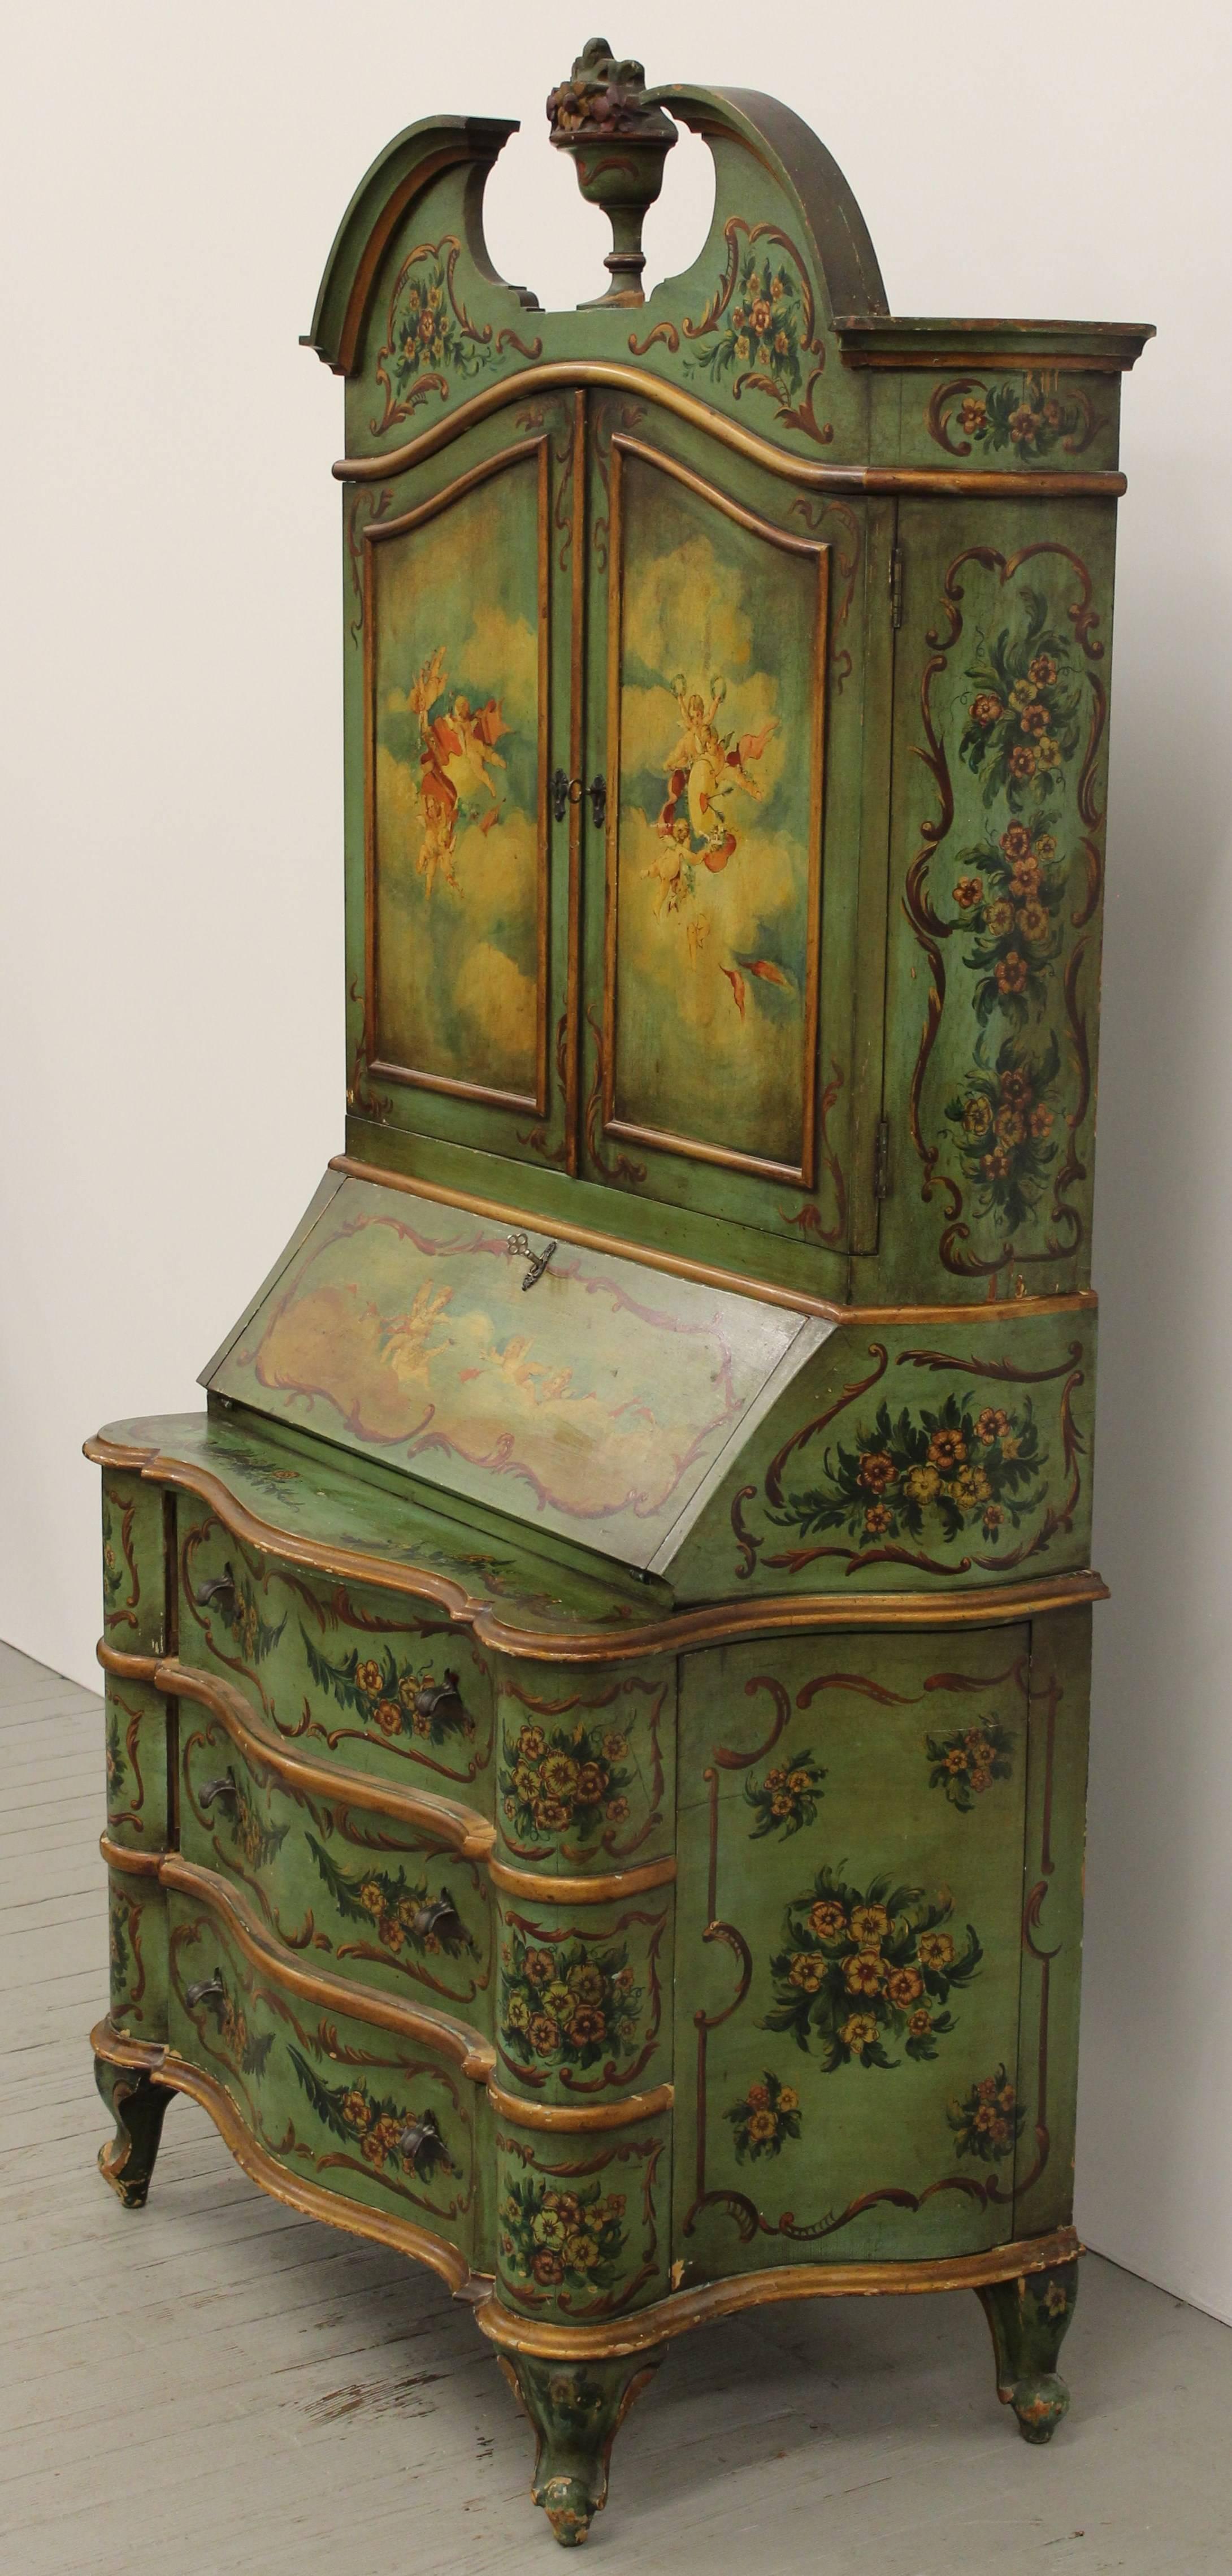 A beautiful Italian Venetian hand-painted secretary with French style feet and accents. Unusual two hidden compartments, which open with spring pull latches on back of cabinet. New York City deliveries for $249.00.